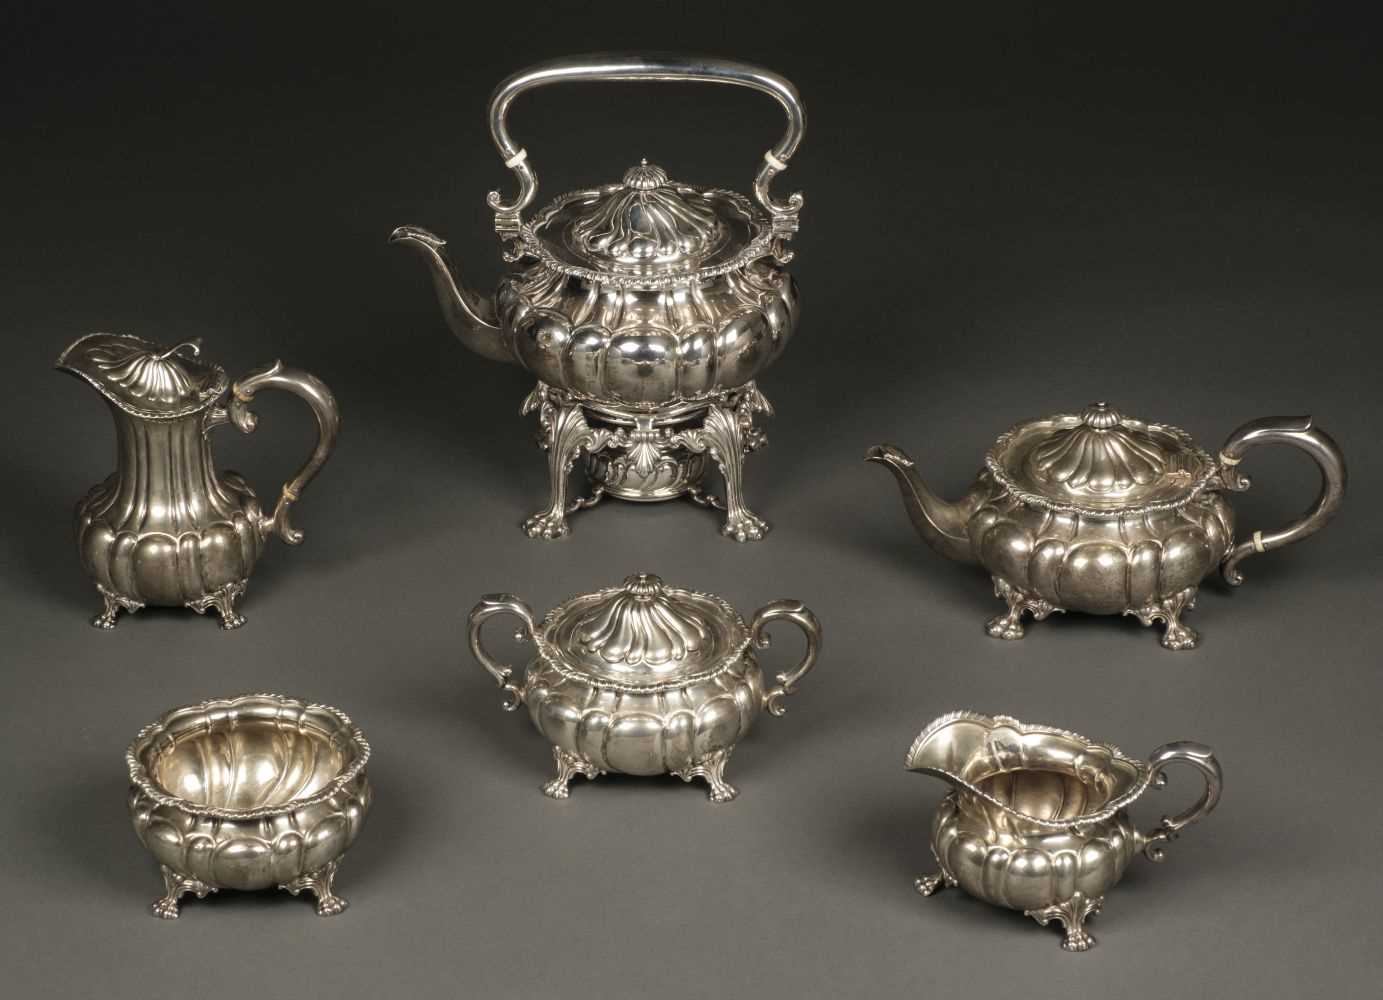 Lot 1 - American Silver. 6-piece tea service by Howard & Co, New York